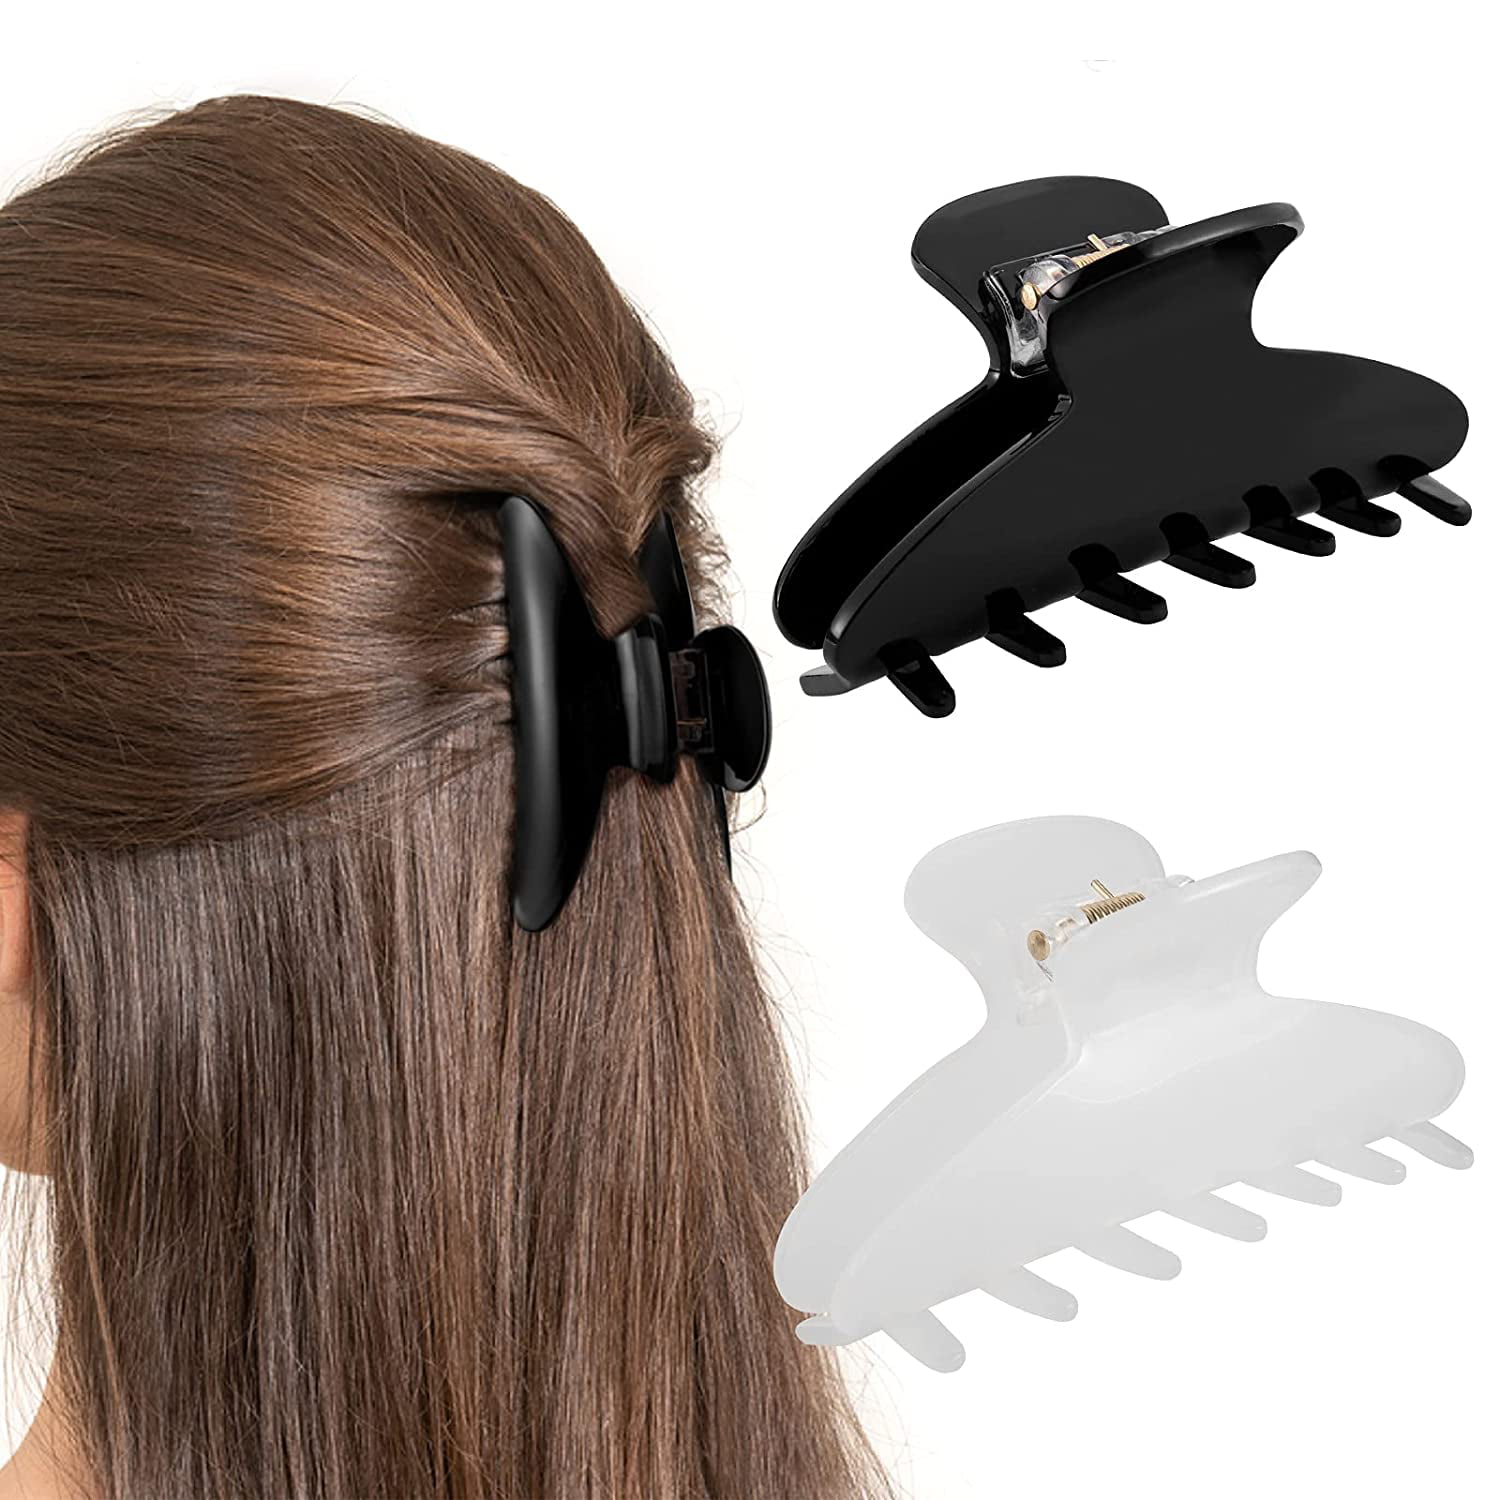  Inch Hair Clip Black White Claw Clips Cellulose Acetate Medium Non-slip  Jaw Clips Strong Grip Hair Clamps for Women Thin Hair Half Bun Updo Fashion  Accessories As Gifts. | Walmart Canada